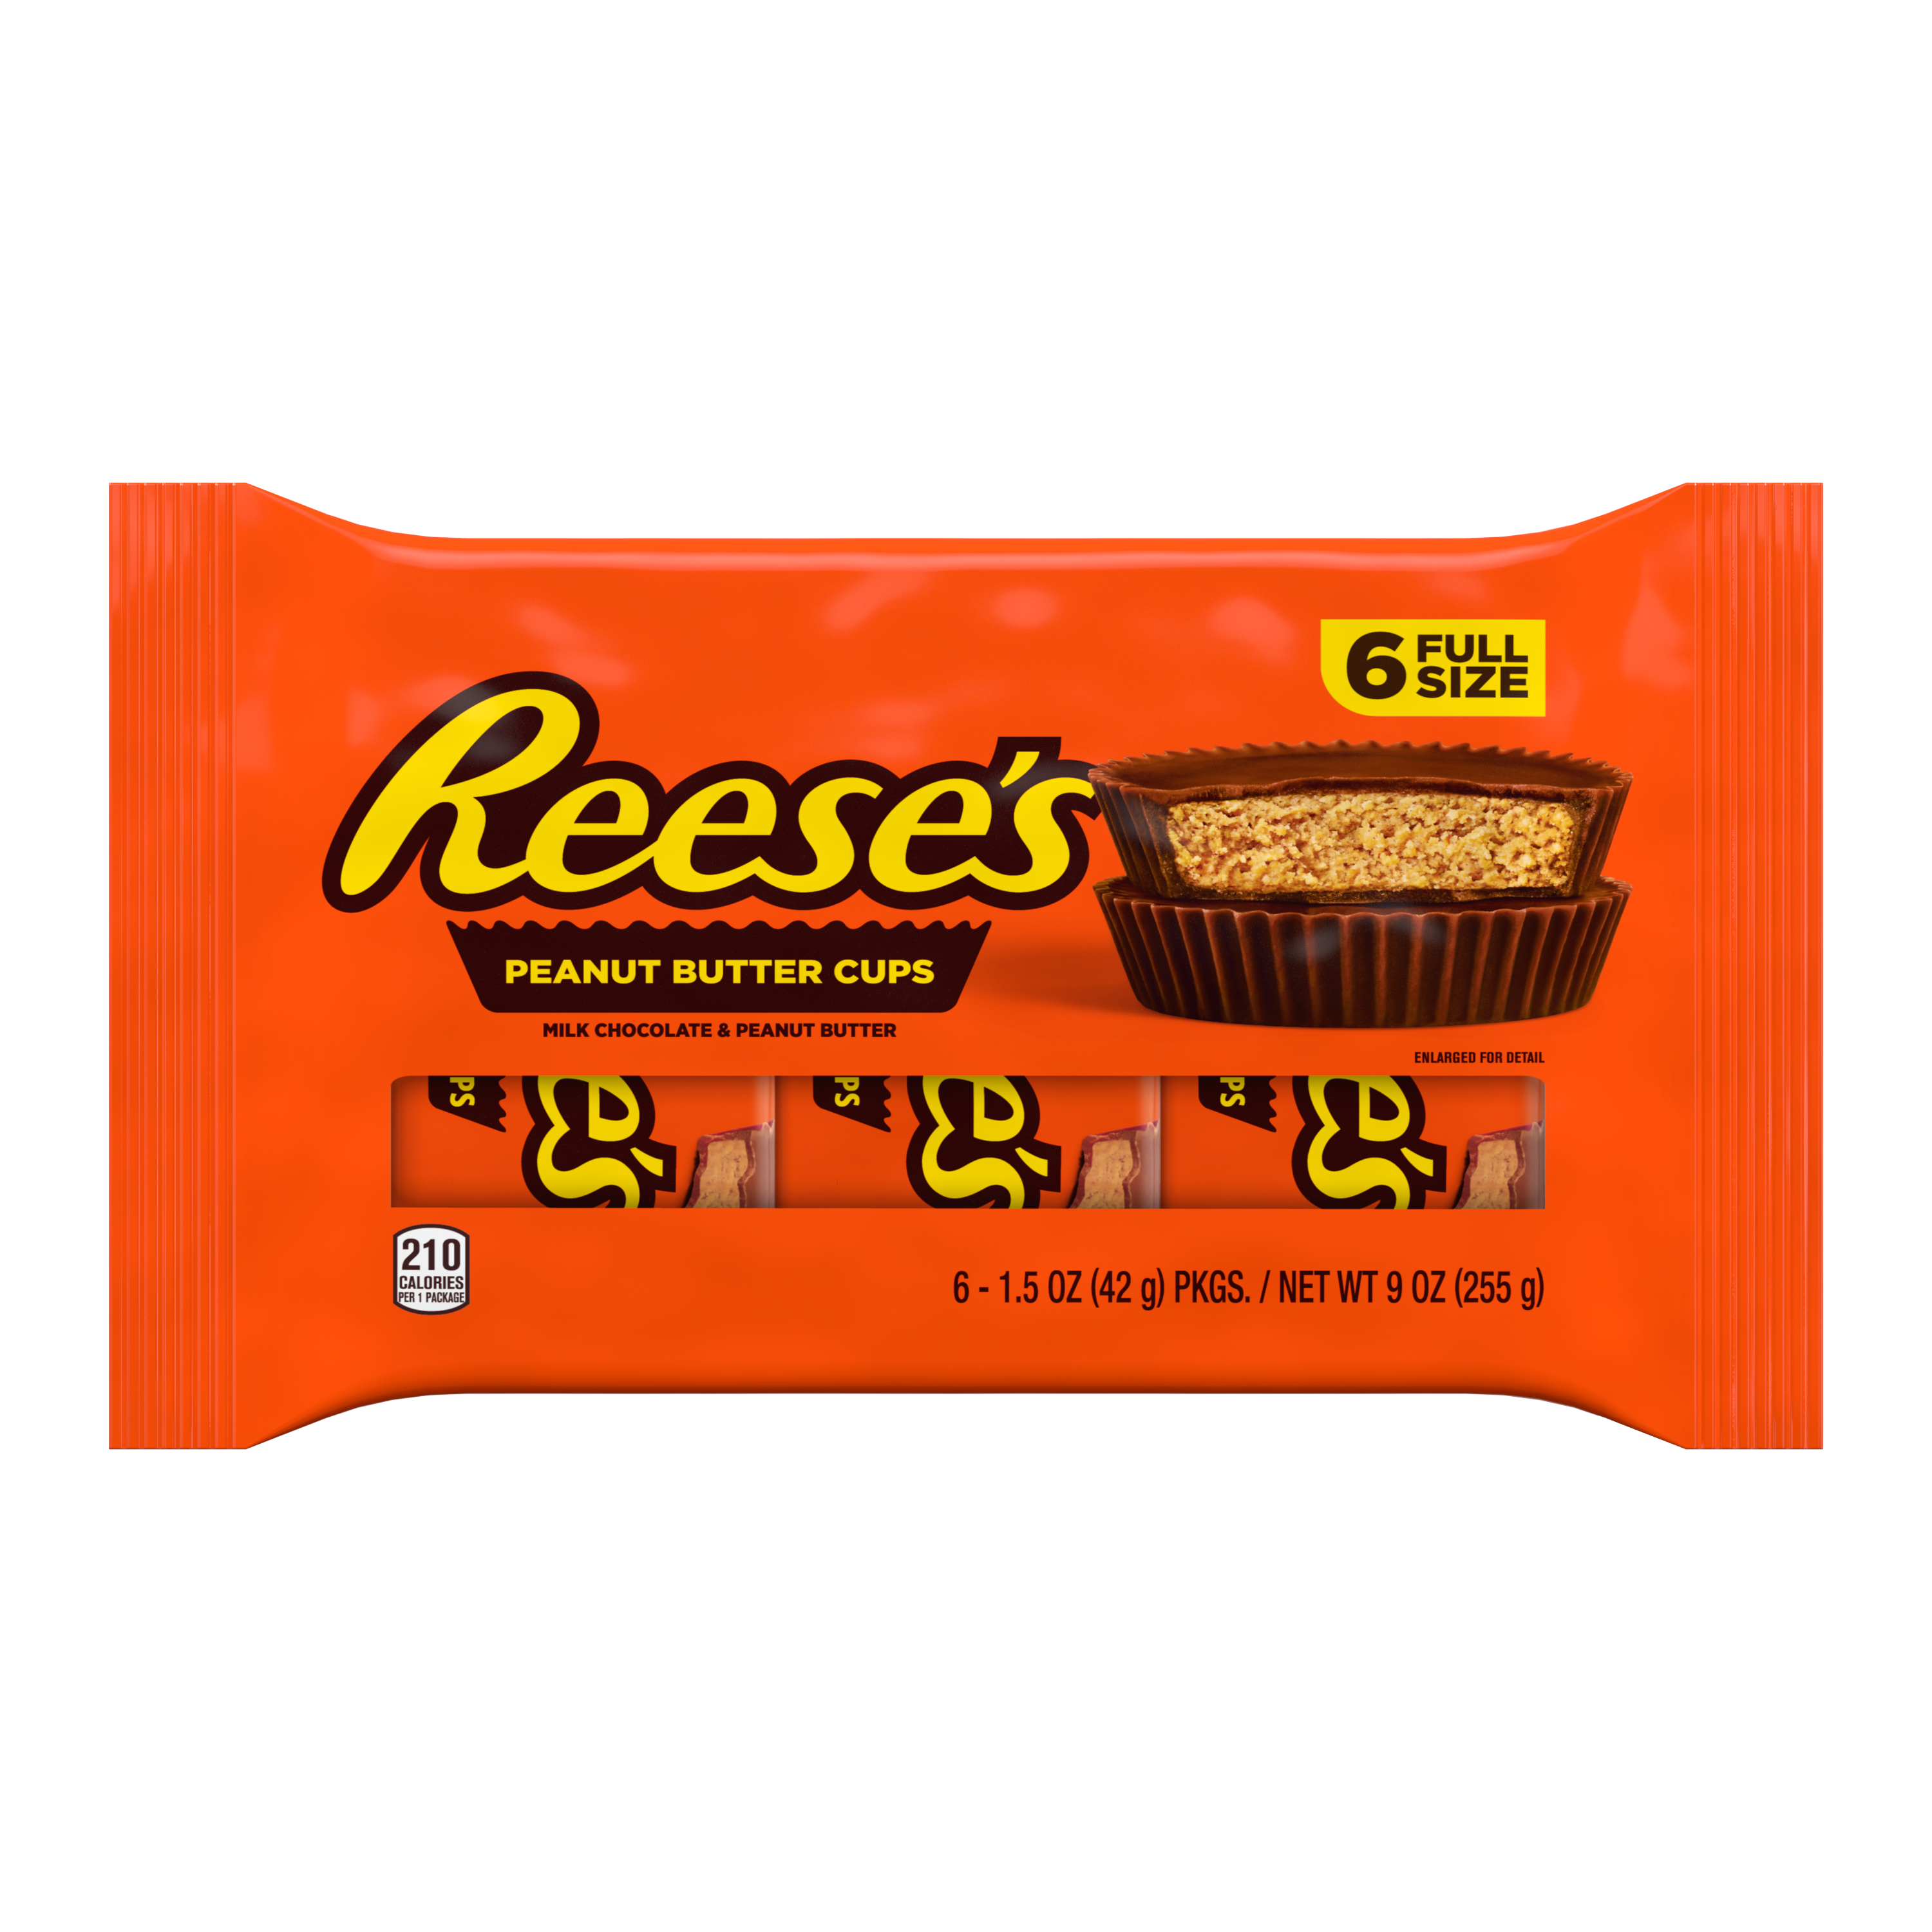 REESE'S Milk Chocolate Peanut Butter Cups, 1.5 oz, 6 pack - Front of Package